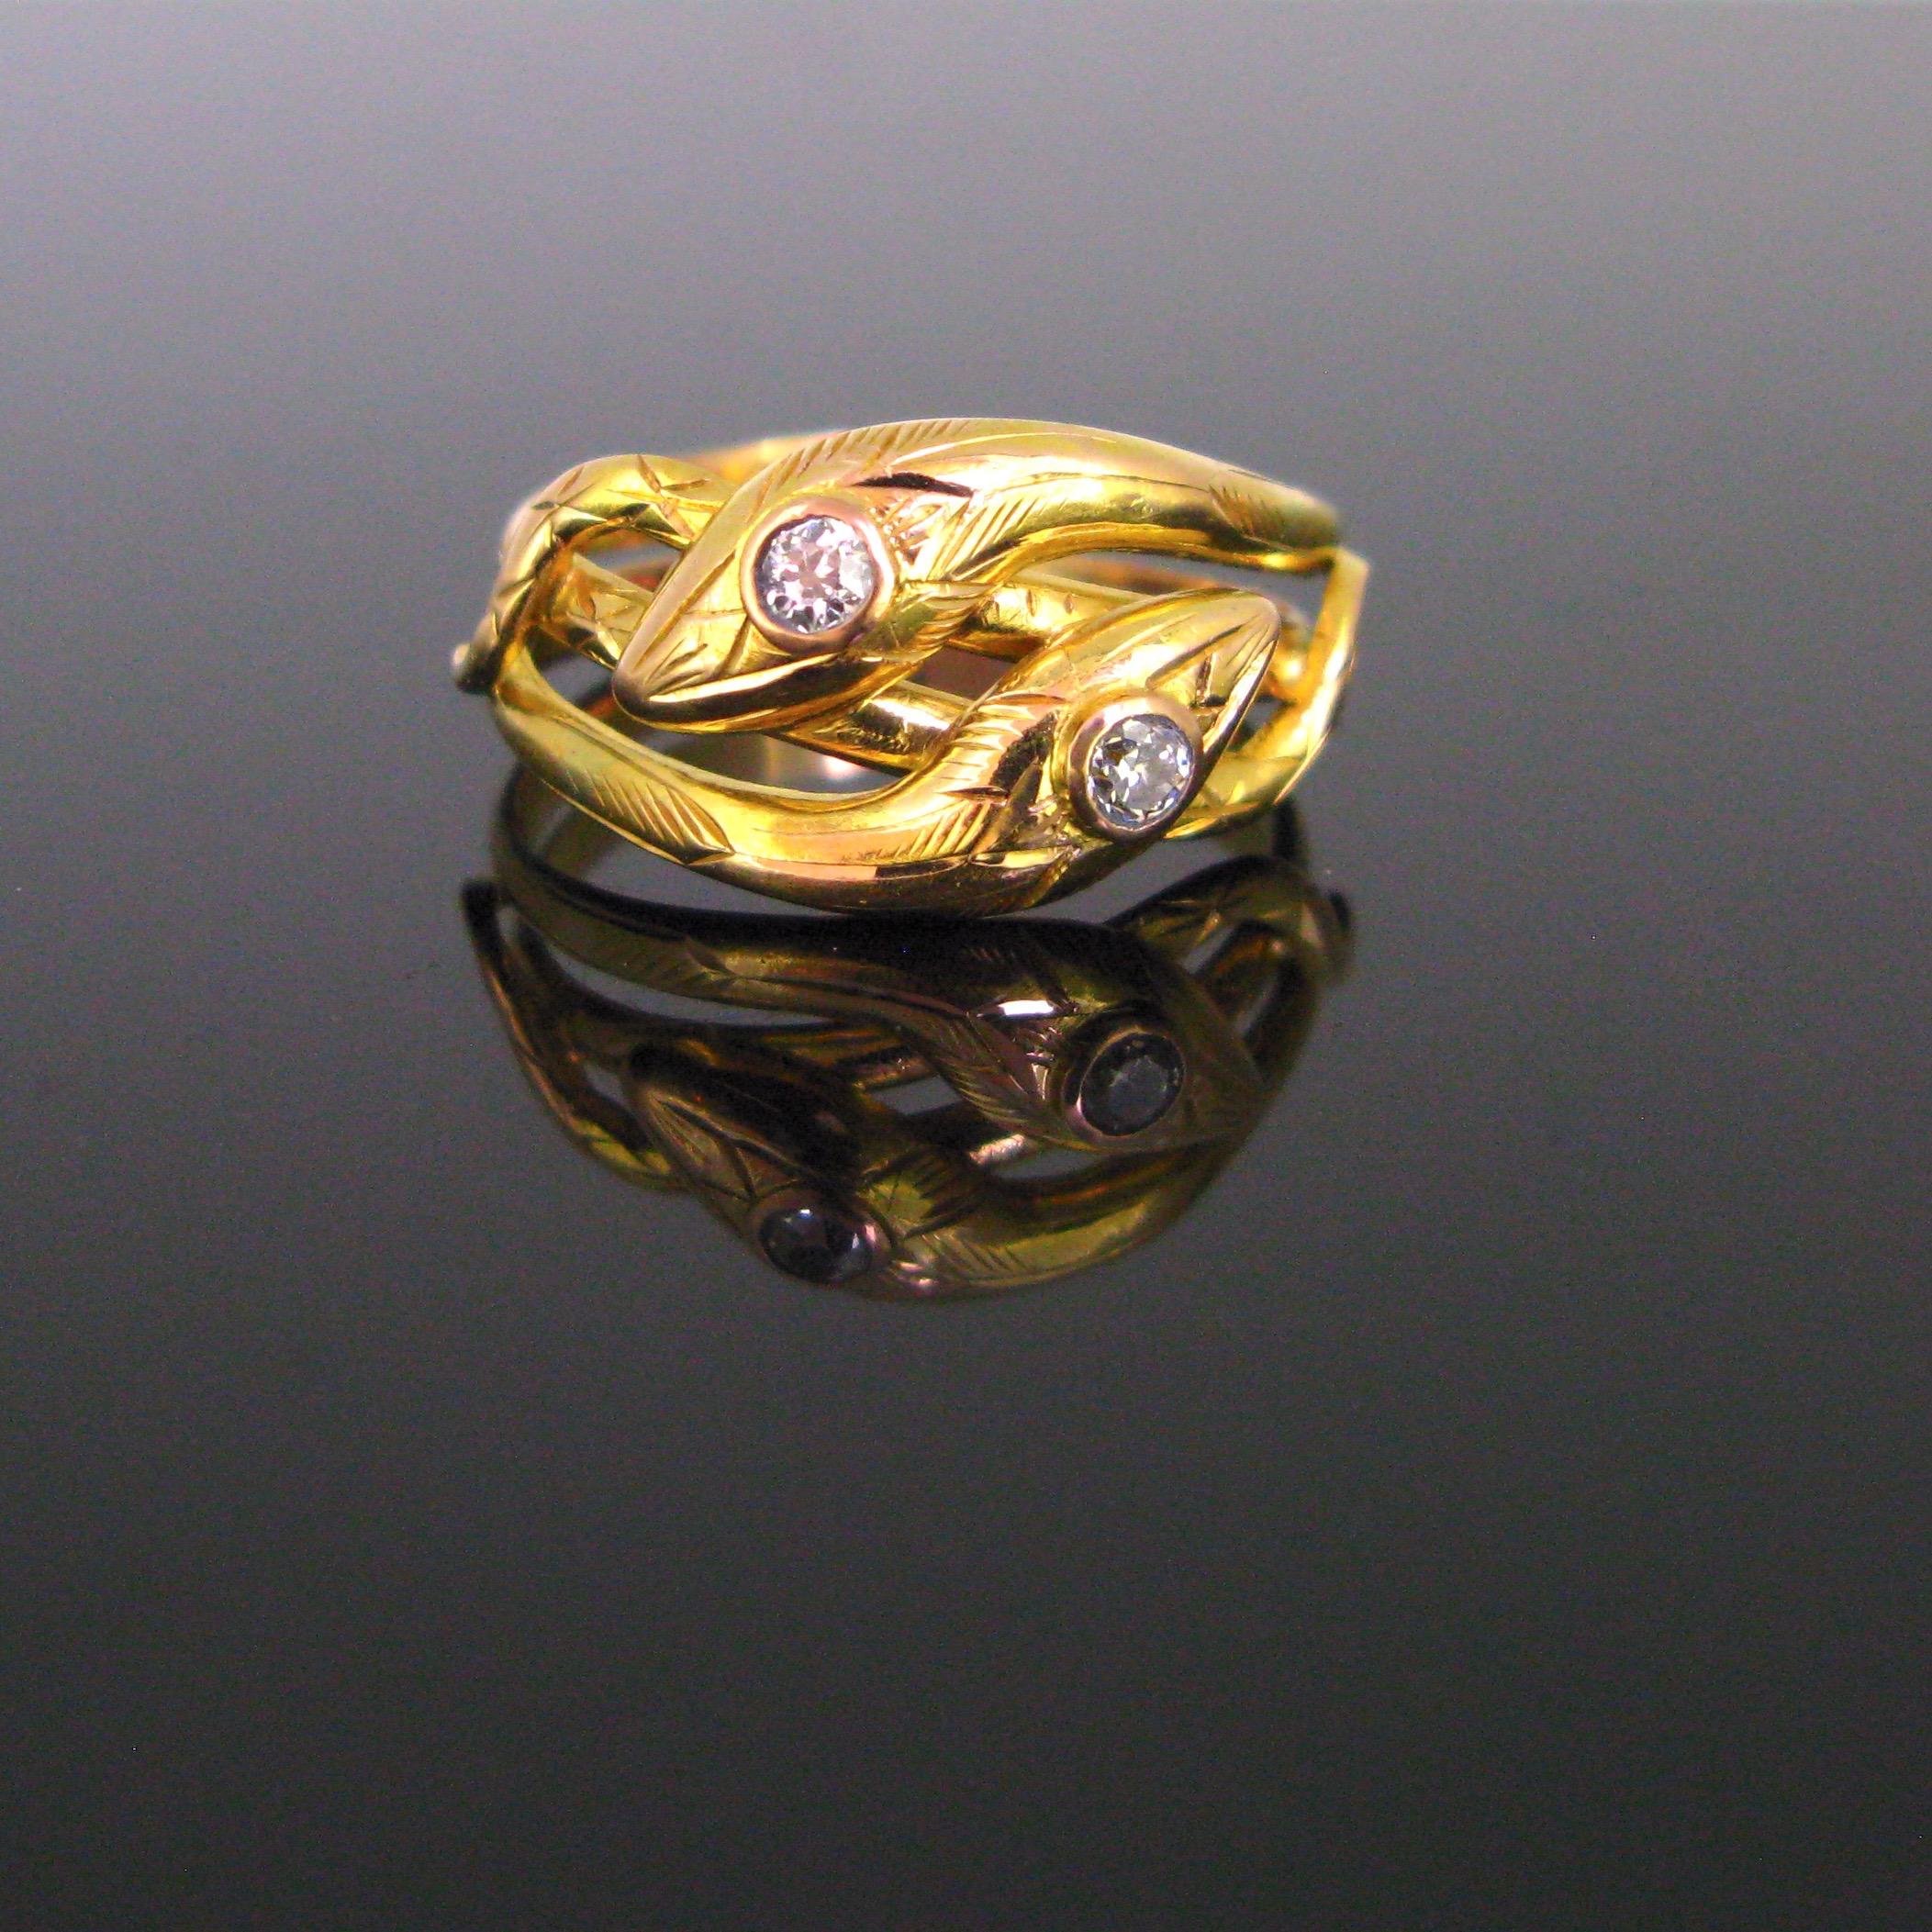 This ravishing ring features two intertwined snakes. Their heads are adorned with a diamond. This type of ring is a real testimony design inspired by the Victorian period. Snakes may frighten a lot but they were a universally popular expression of